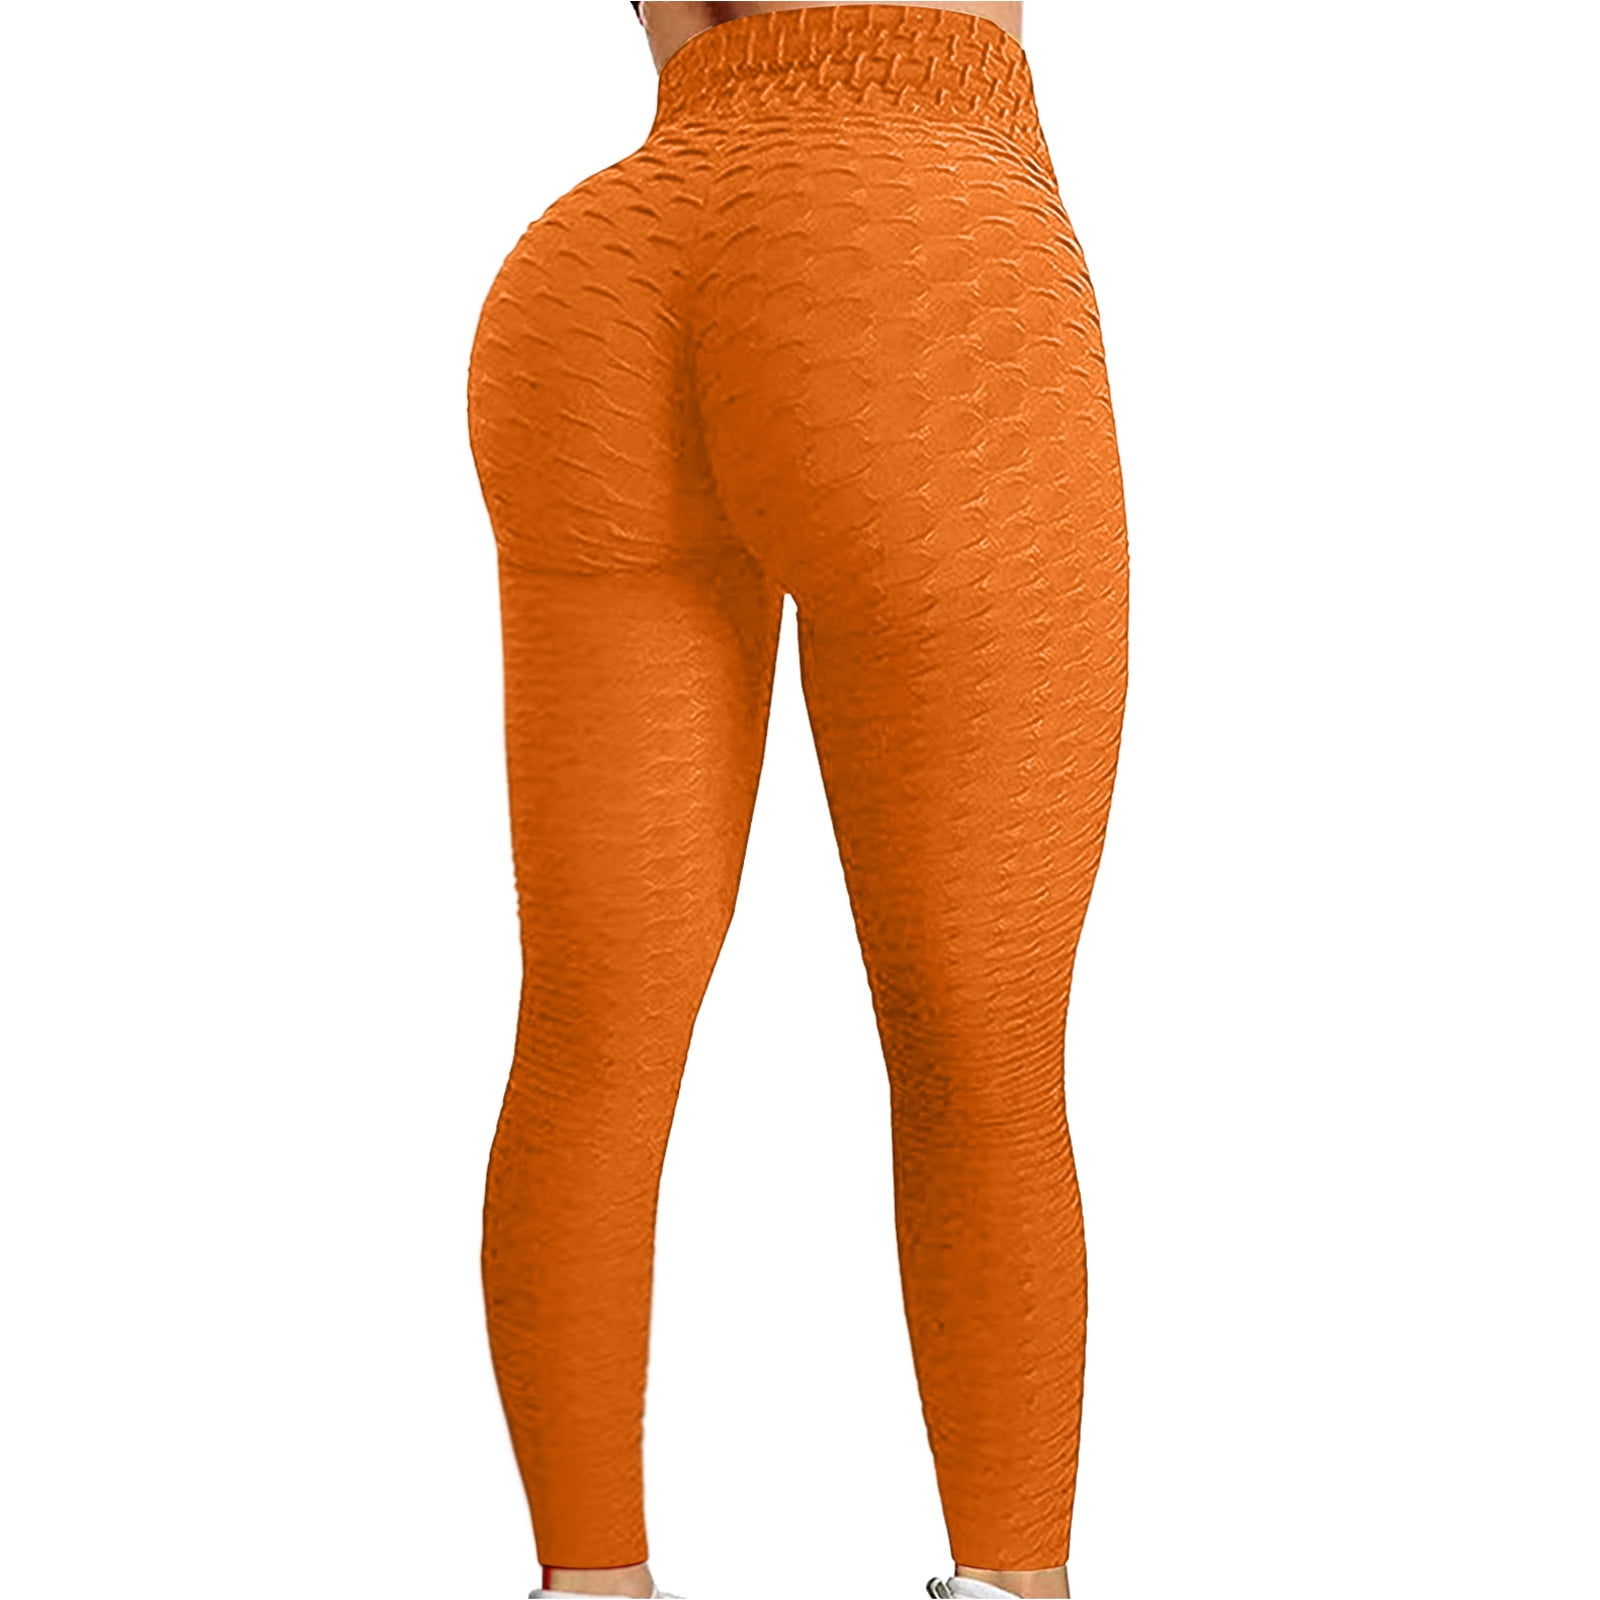 jsaierl High Waisted Leggings for Women Ribbed Soft Tummy Control